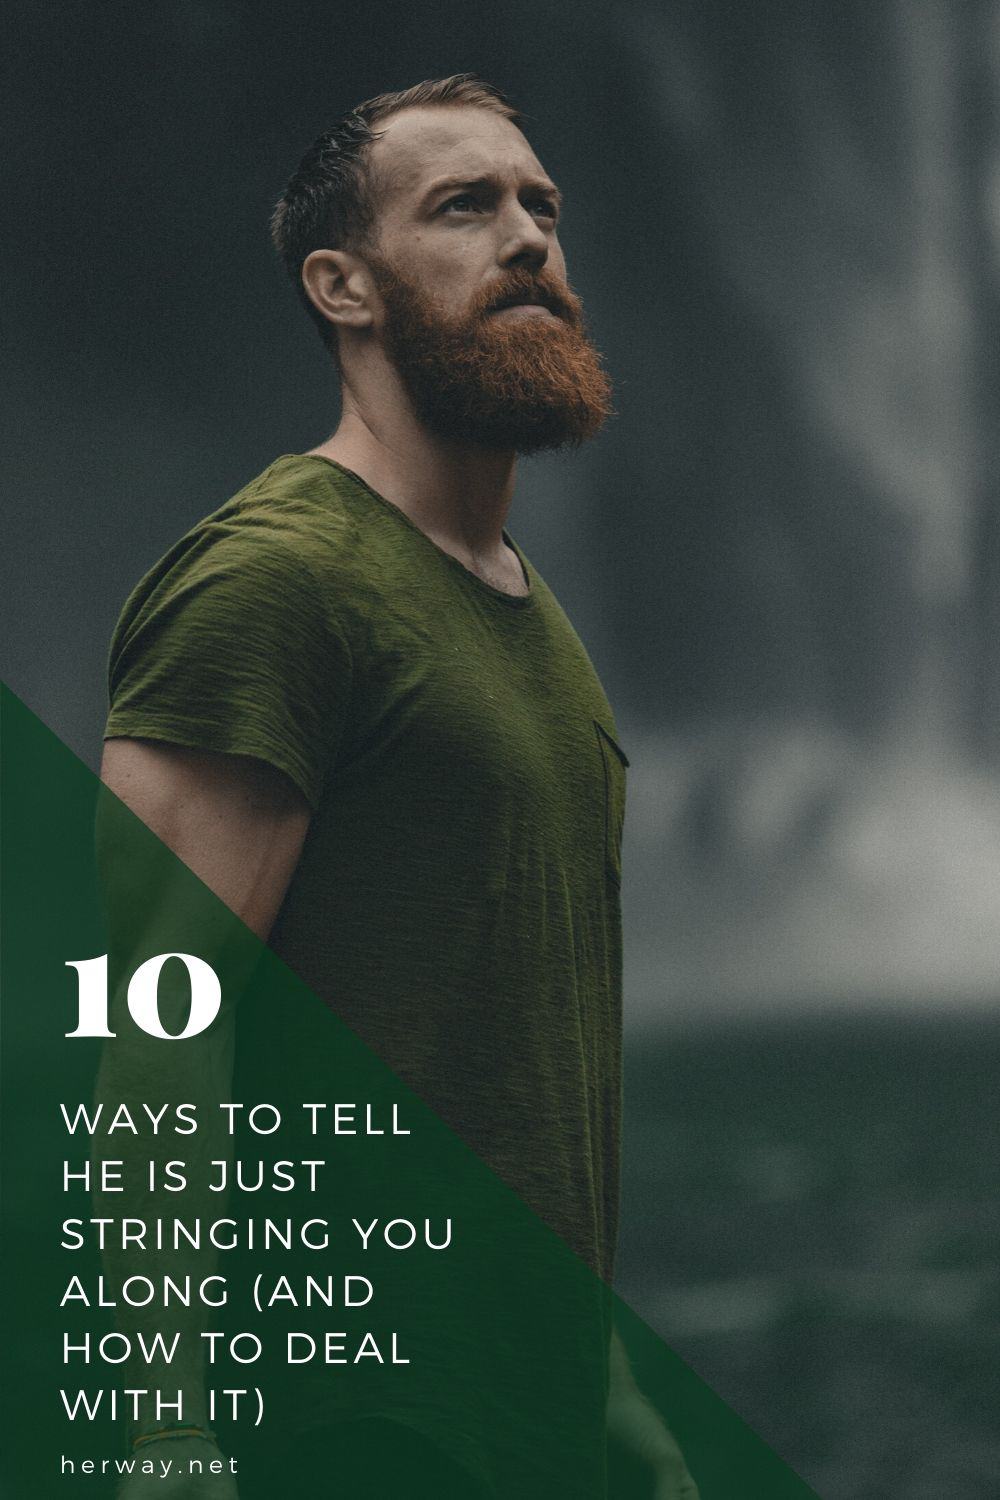 10 WAYS TO TELL HE IS JUST STRINGING YOU ALONG (AND HOW TO DEAL WITH IT)